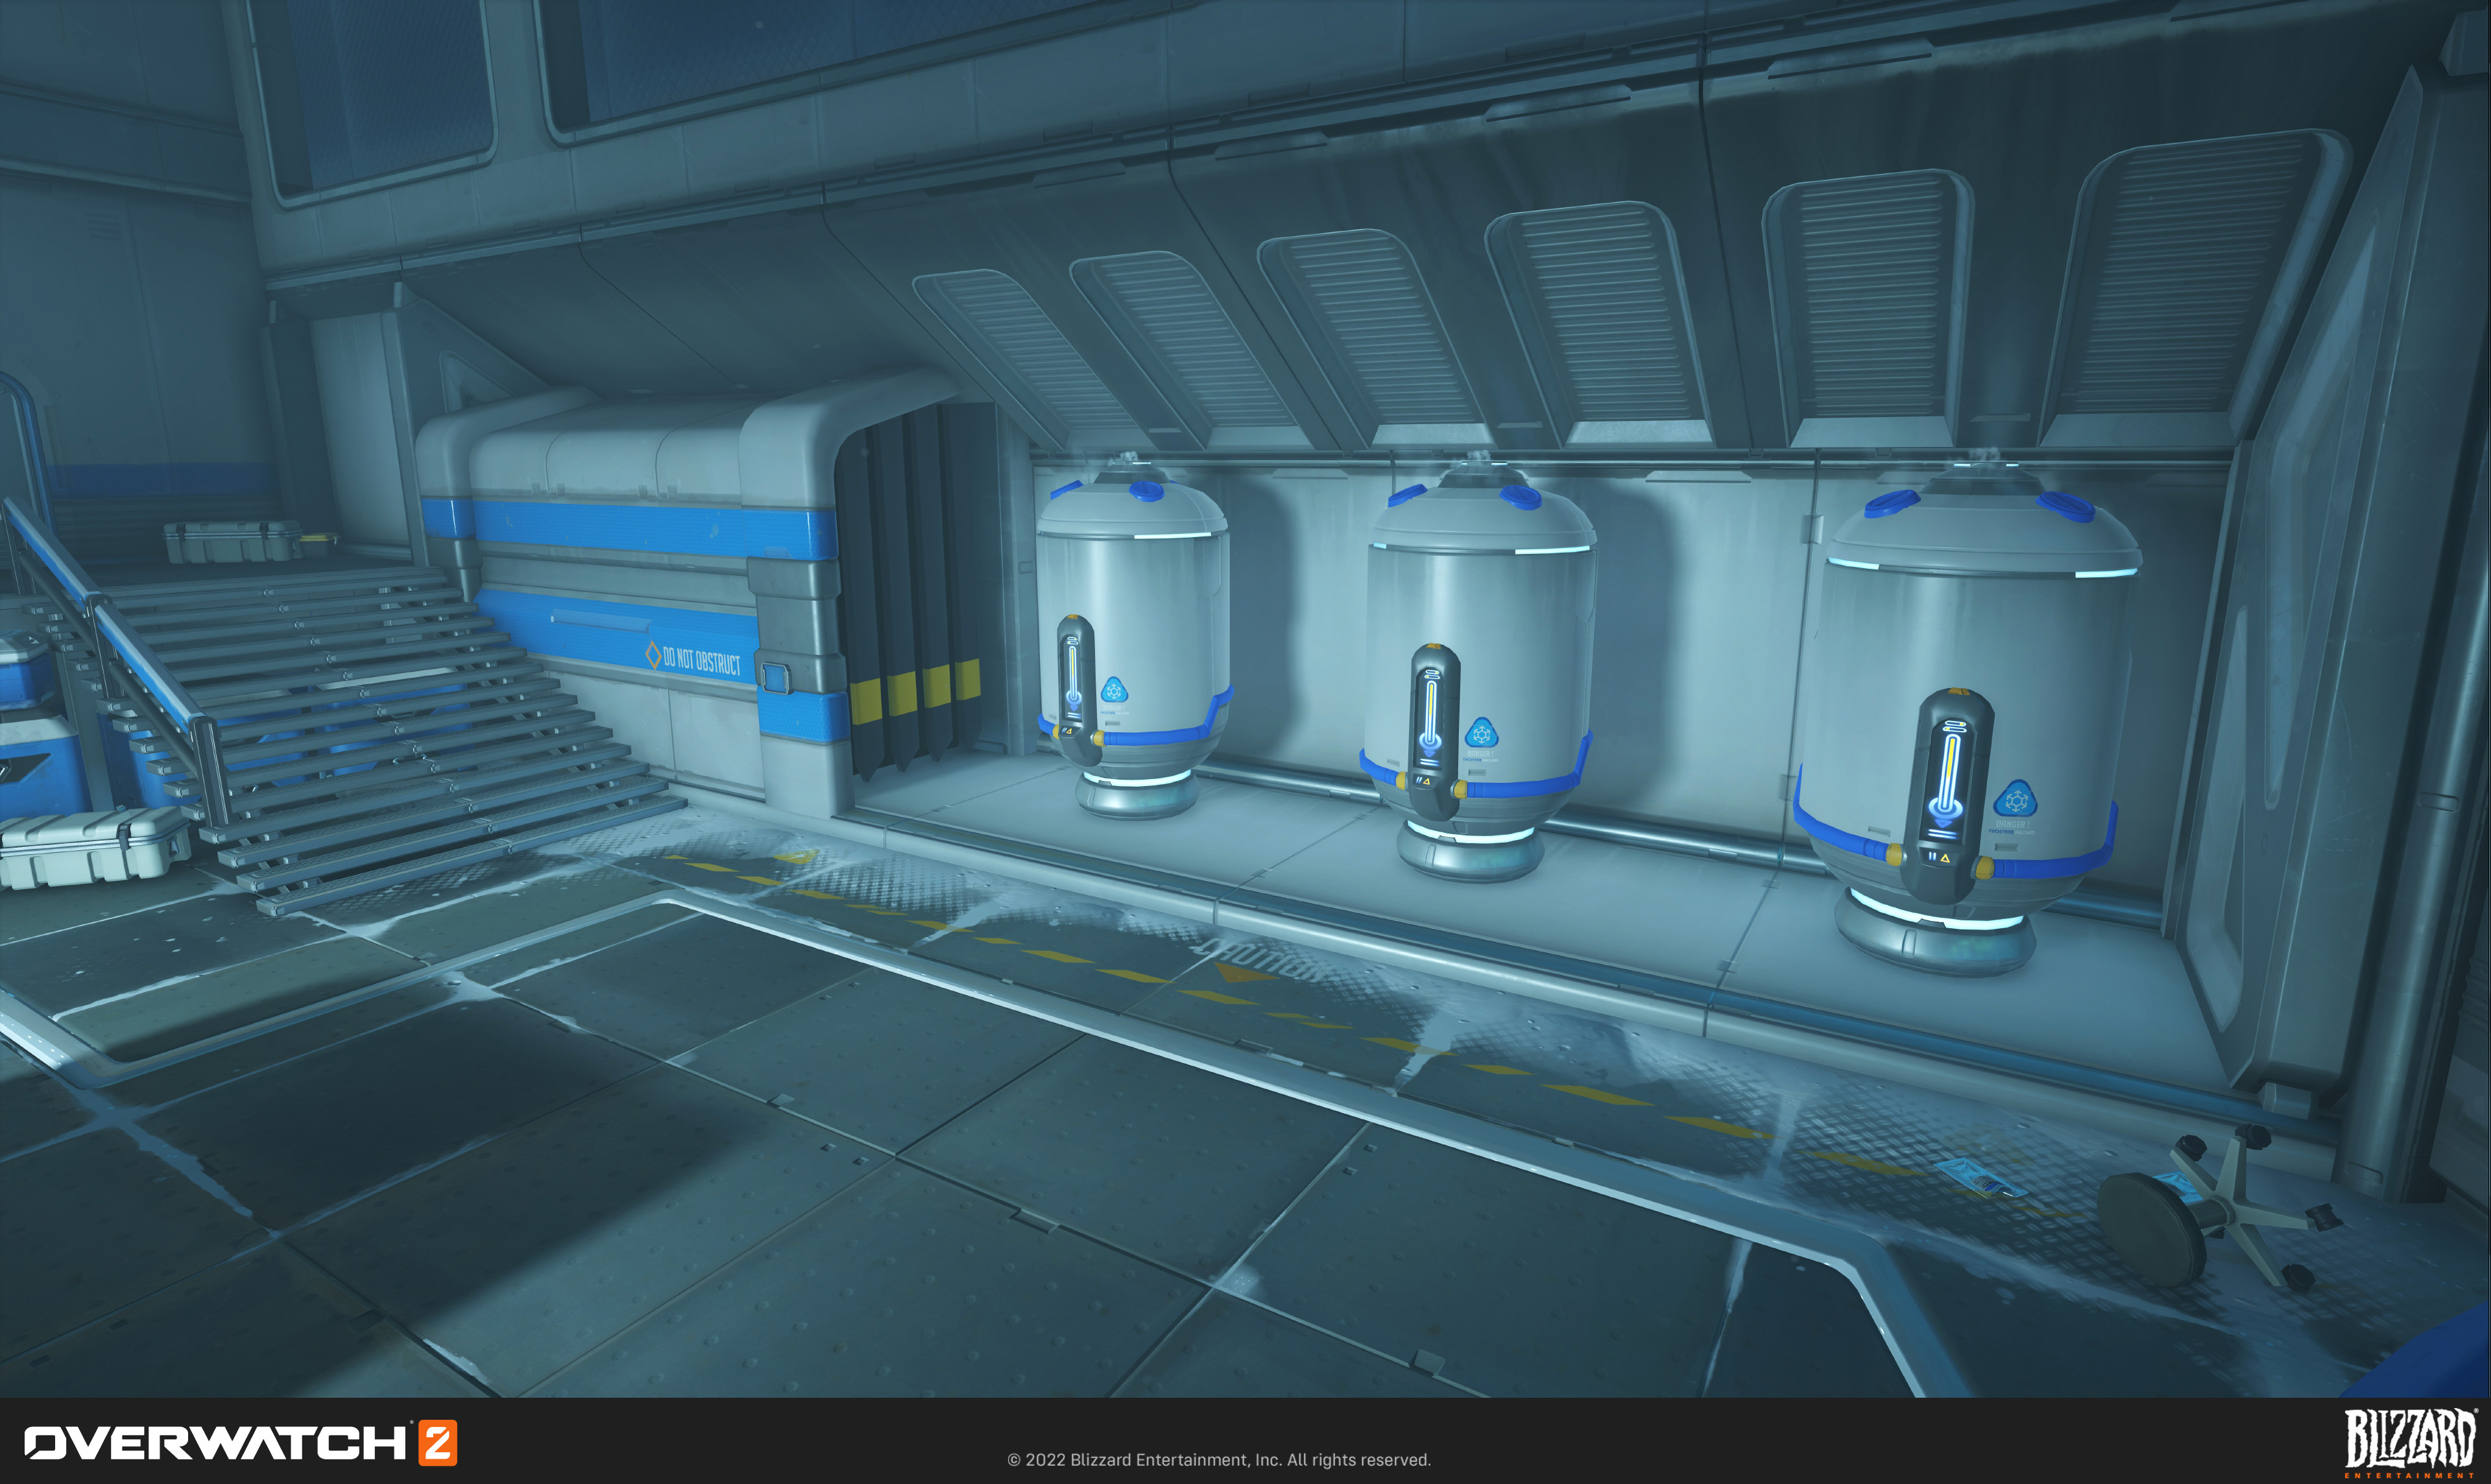 Labs (Spawn room) - Cryo tanks created by me